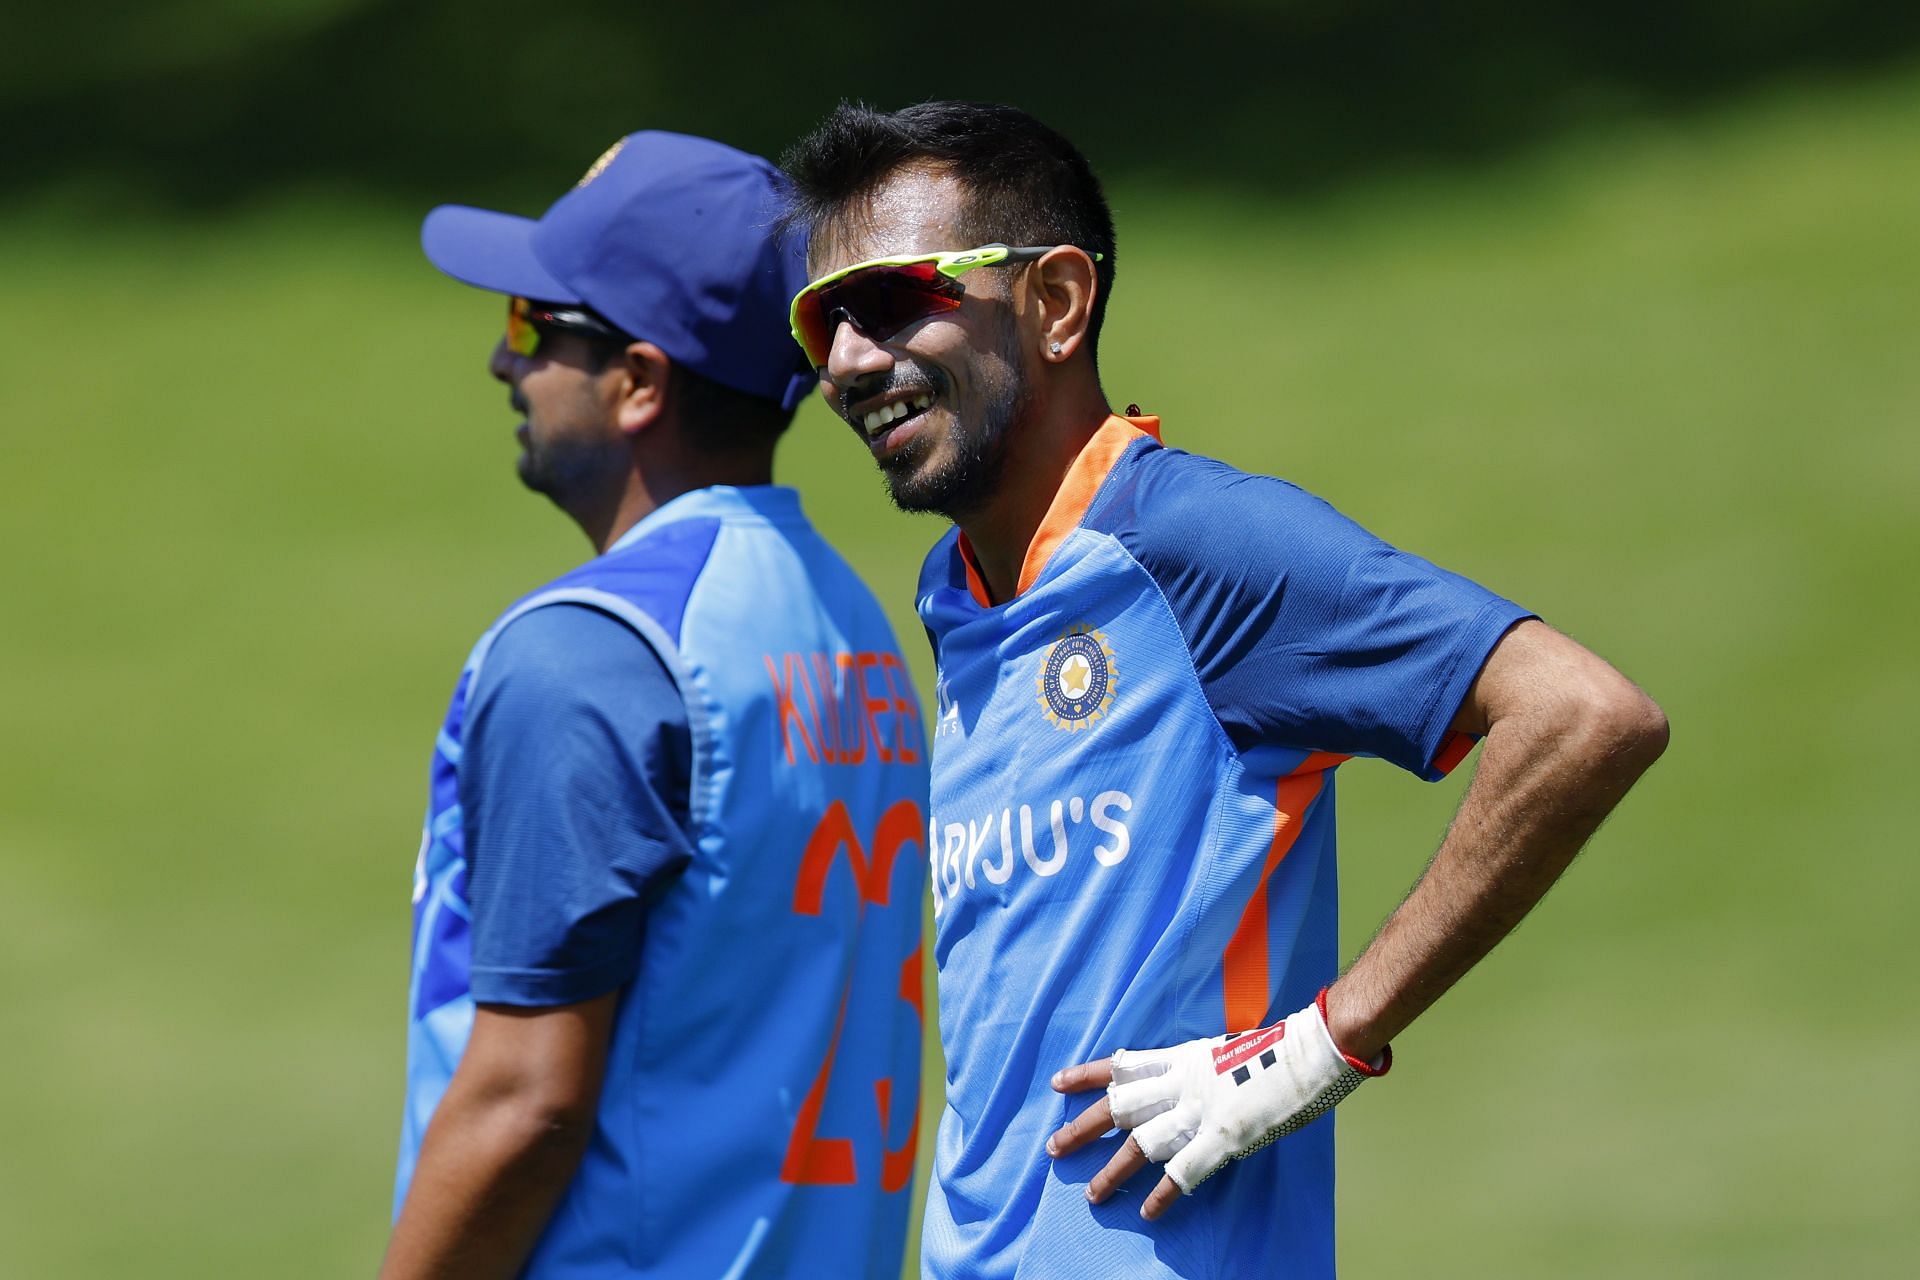 India's predicted playing XI for the 2nd T20I vs Sri Lanka